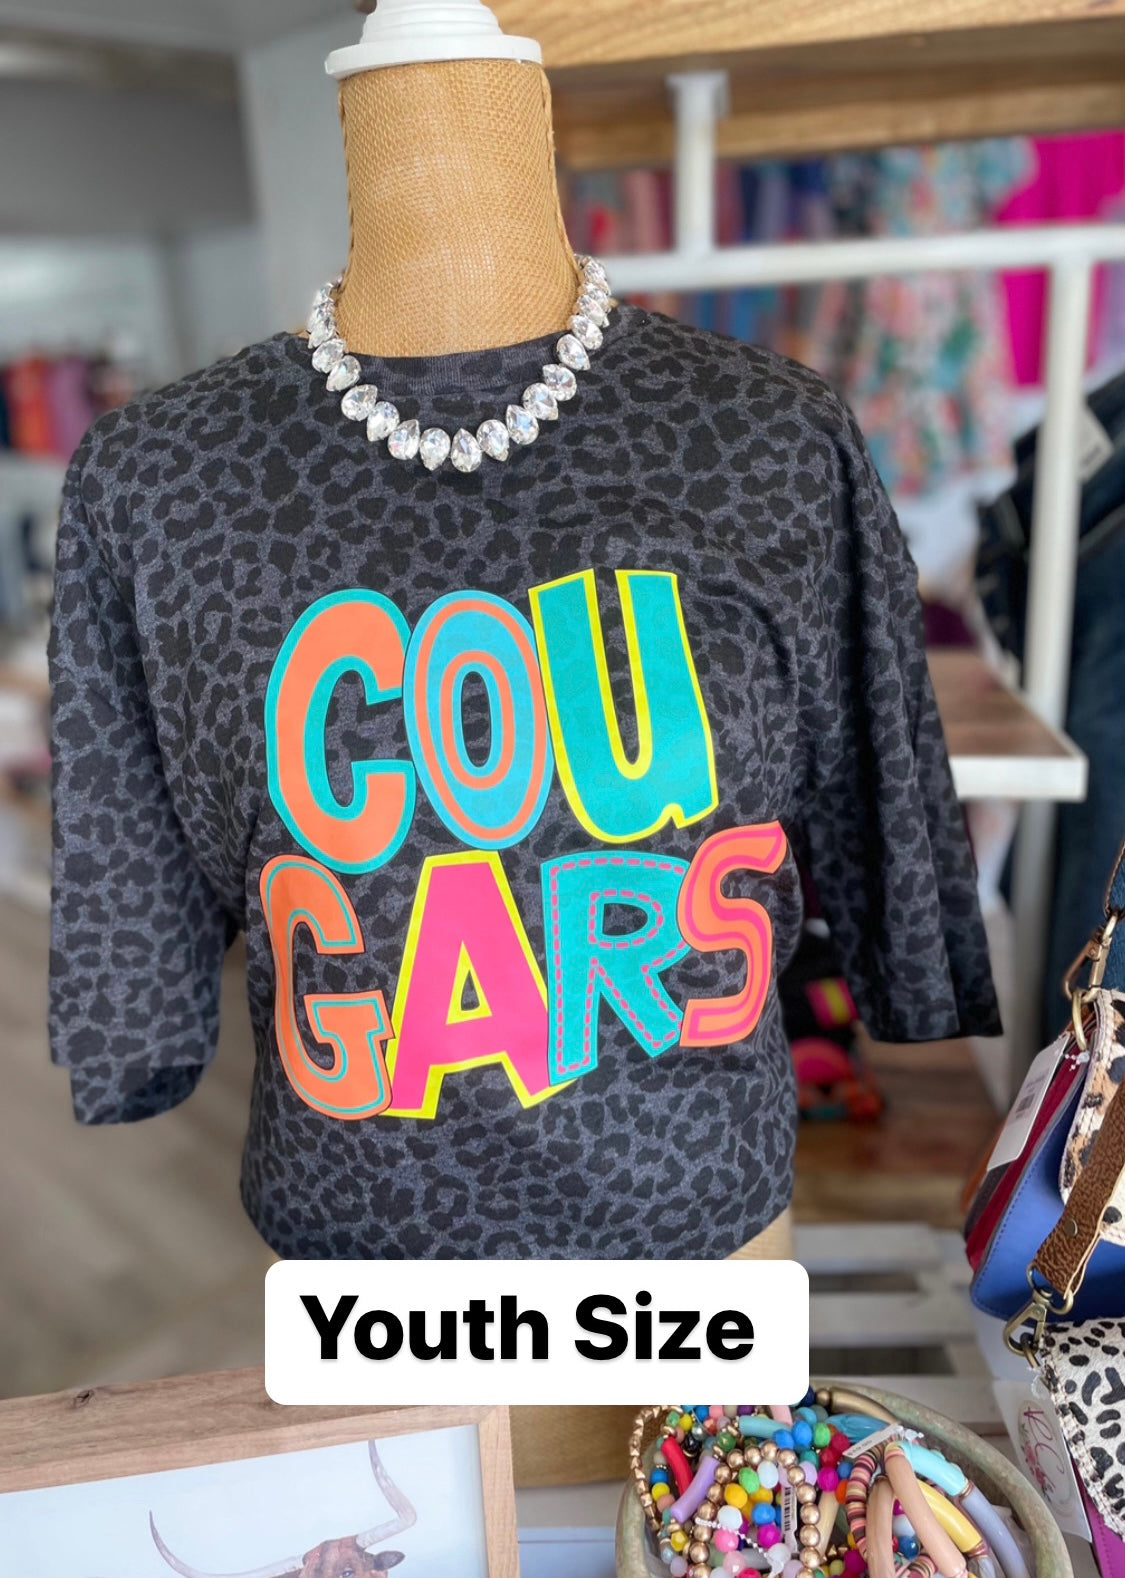 Cougars Pride - Youth